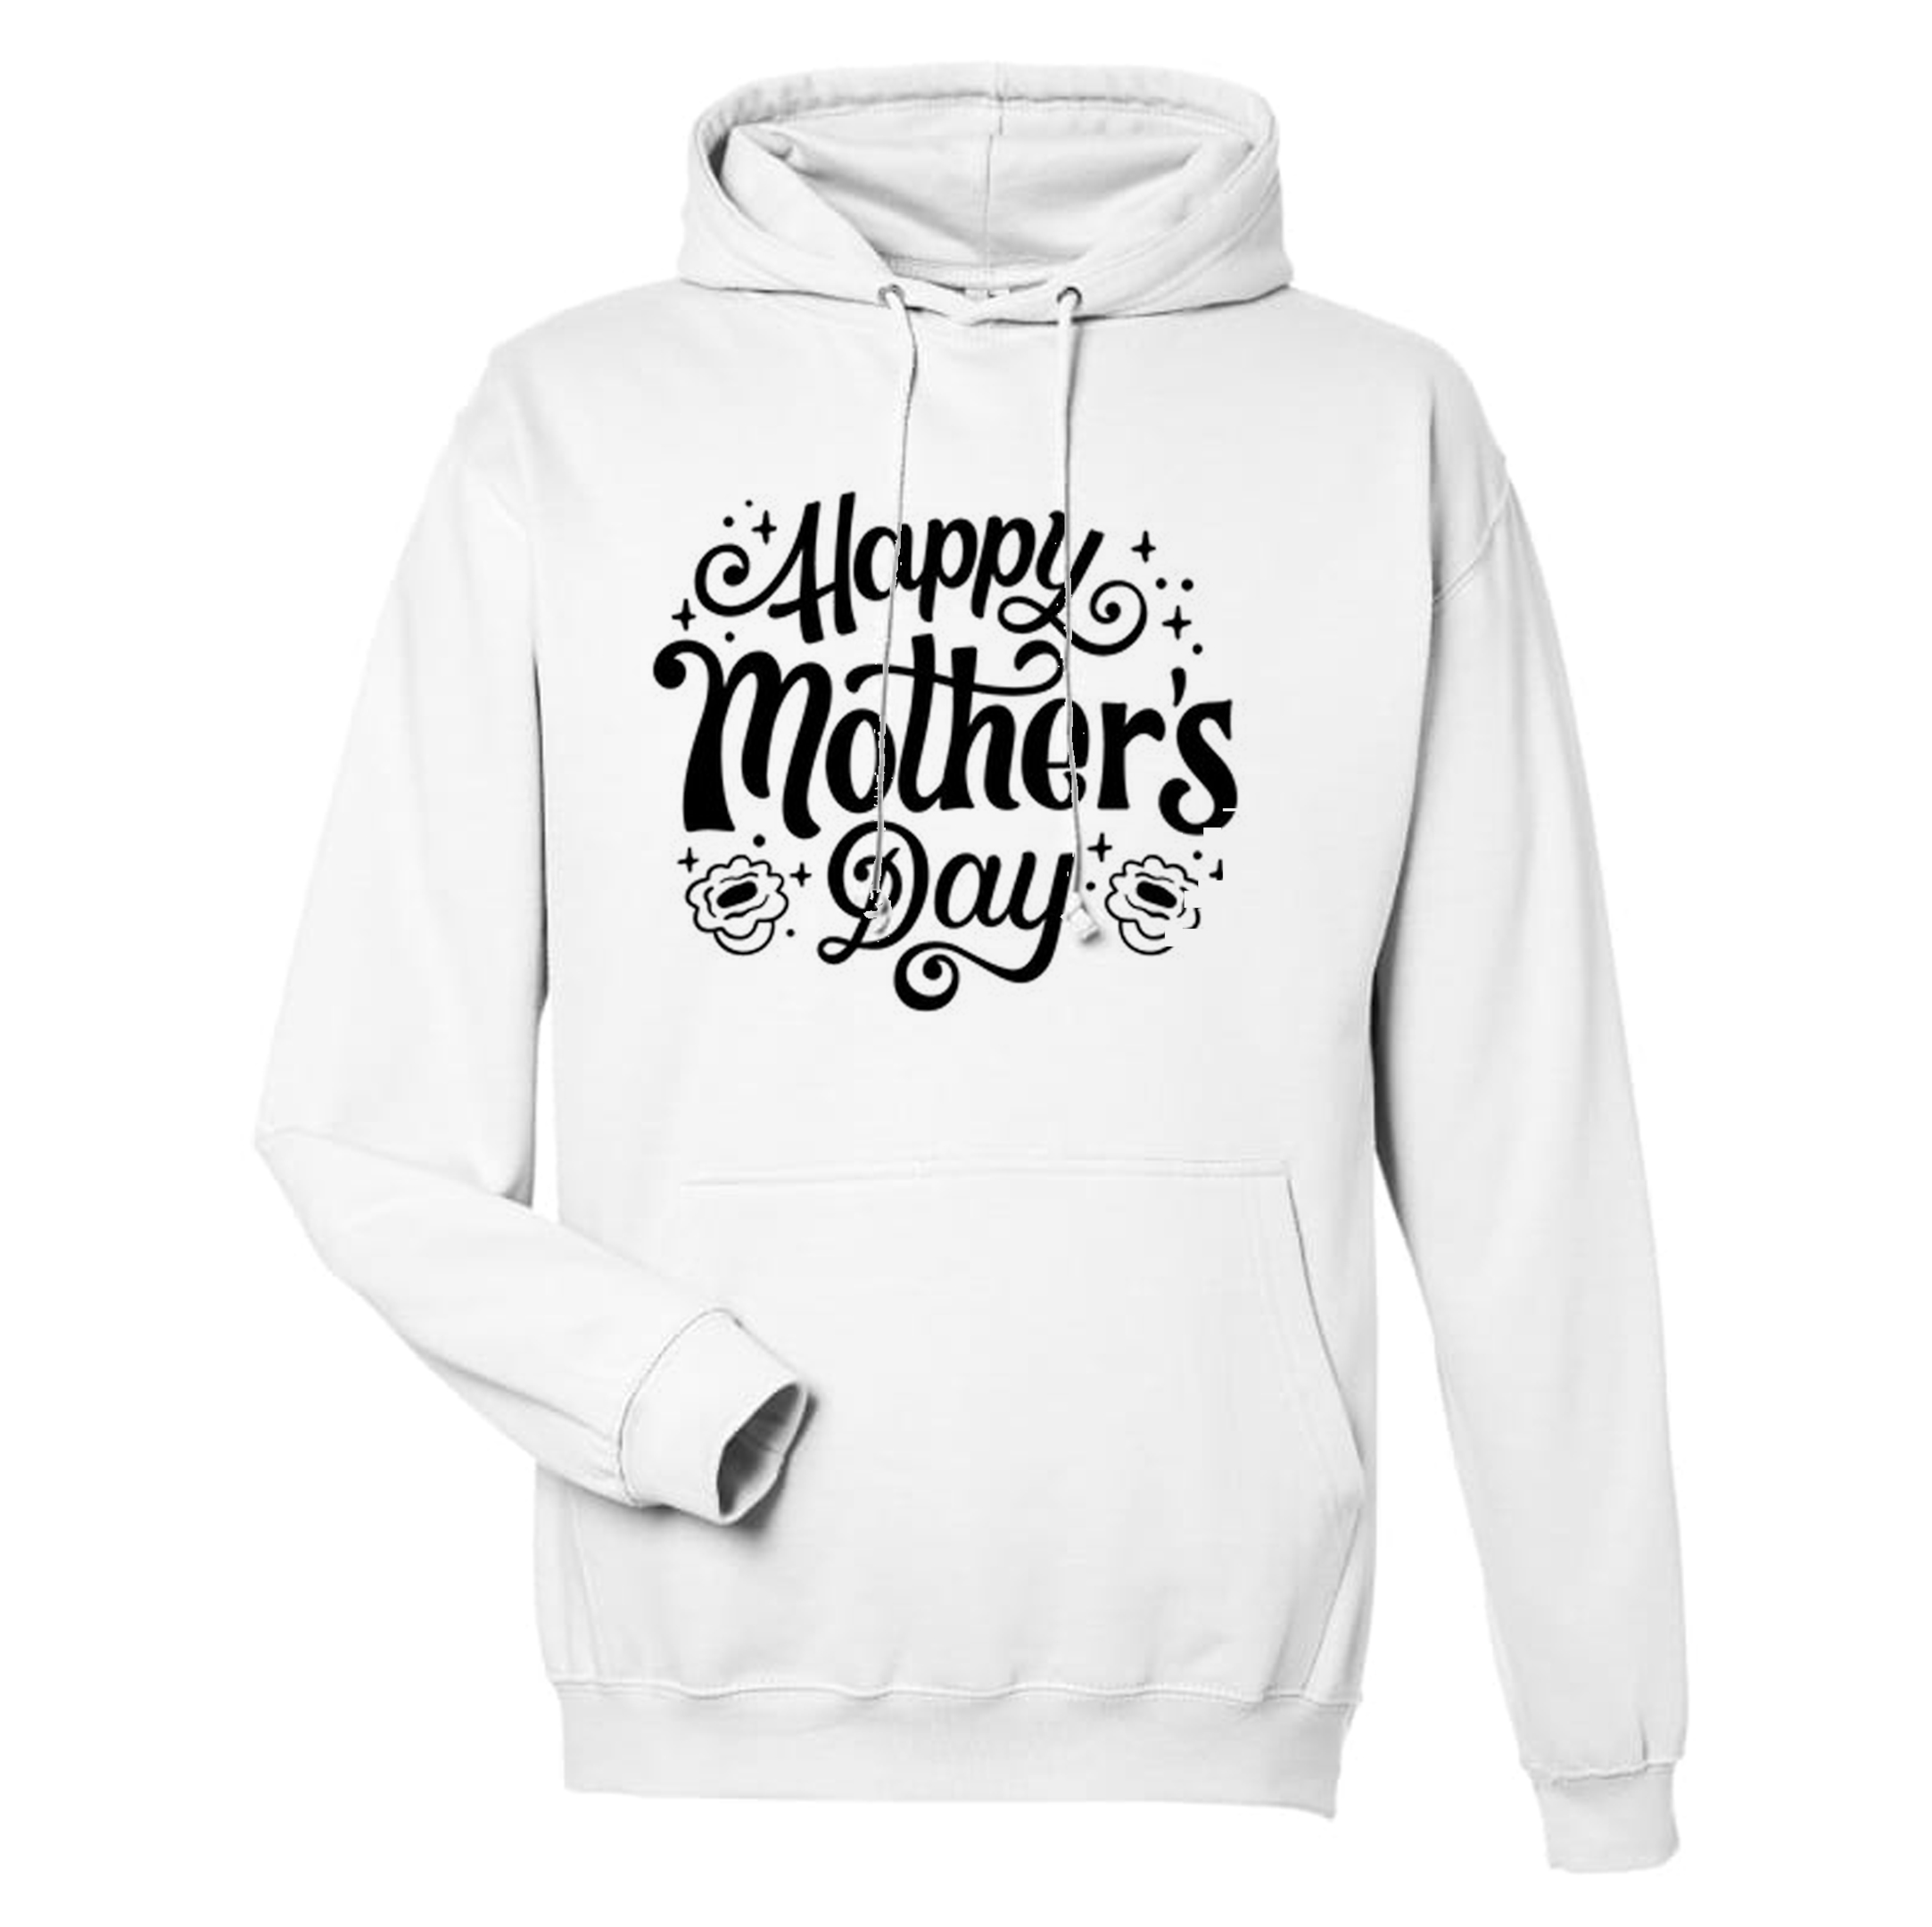 chance to win on mother's day contest